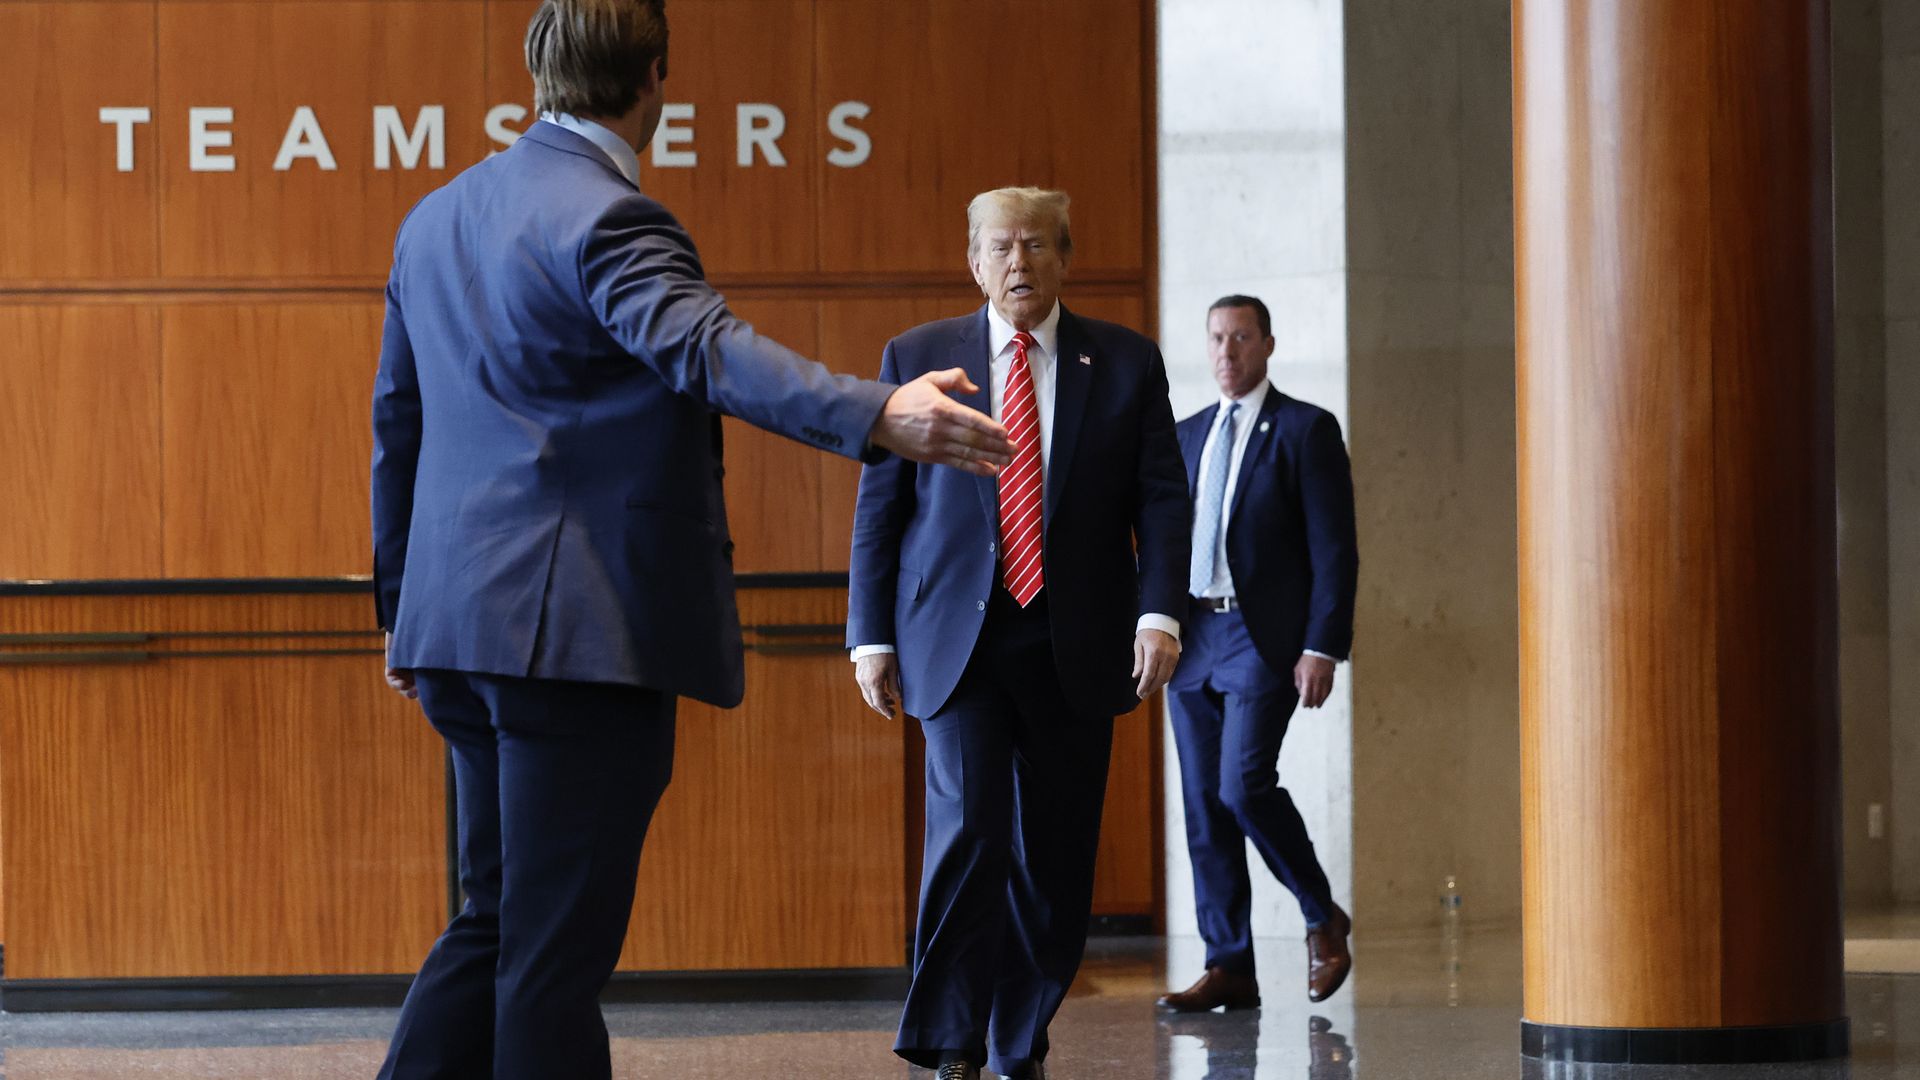 Donald Trump walks in a building with a Teamsters sign on a wall behind him.